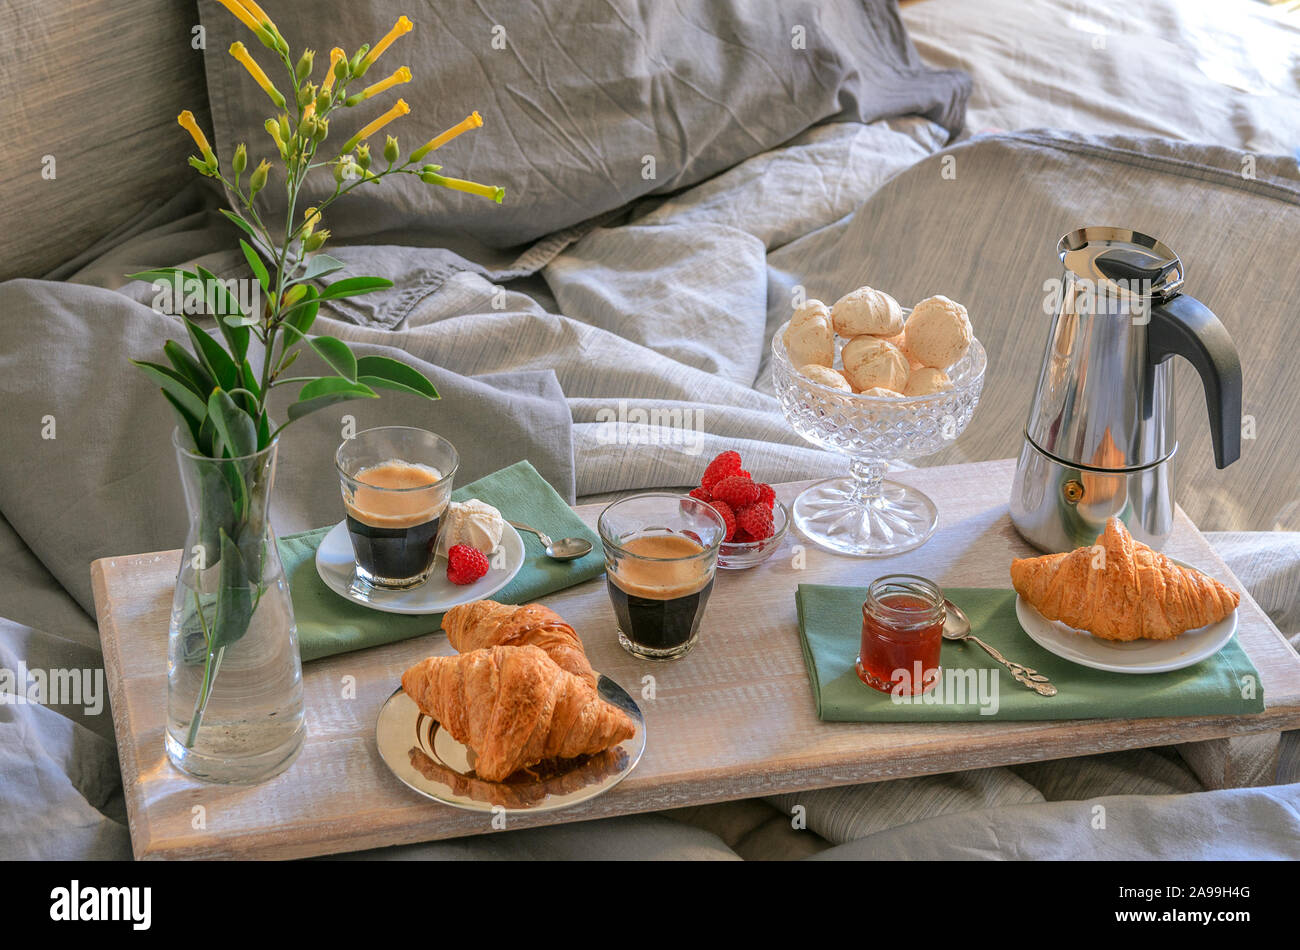 Luxury breakfast  in the bed in hotel bedroom . Coffee maker  and coffee glasses, croissants, jam, raspberry meringue and flowers on wood tray .Good m Stock Photo